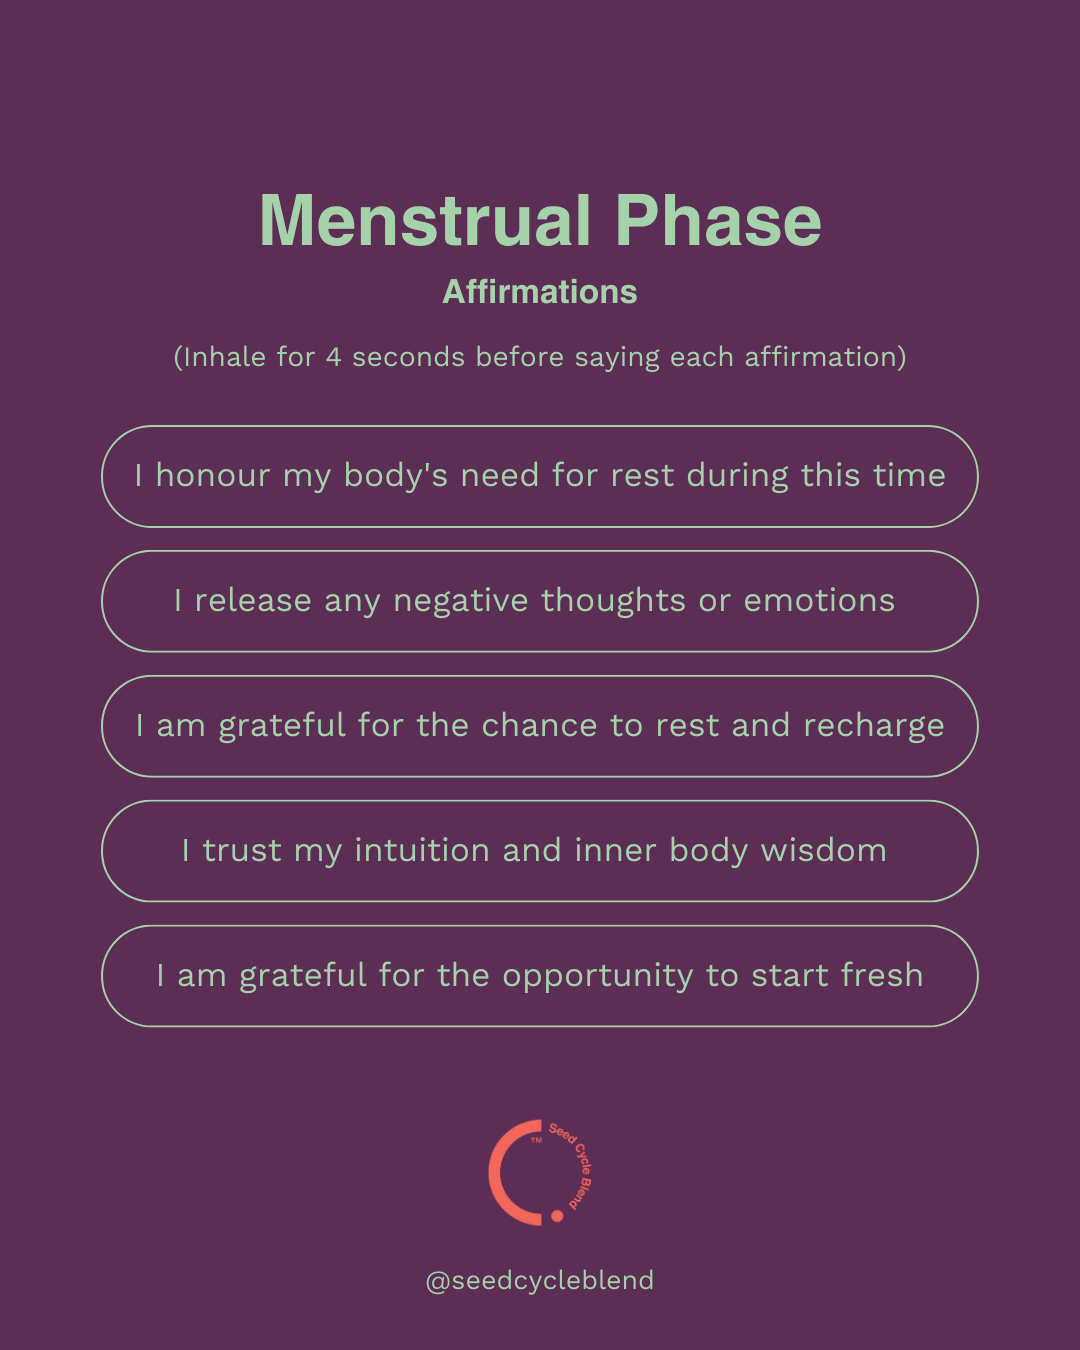 seed-cycling-subscription-cycle-syncing-meditation-menstrual-phase